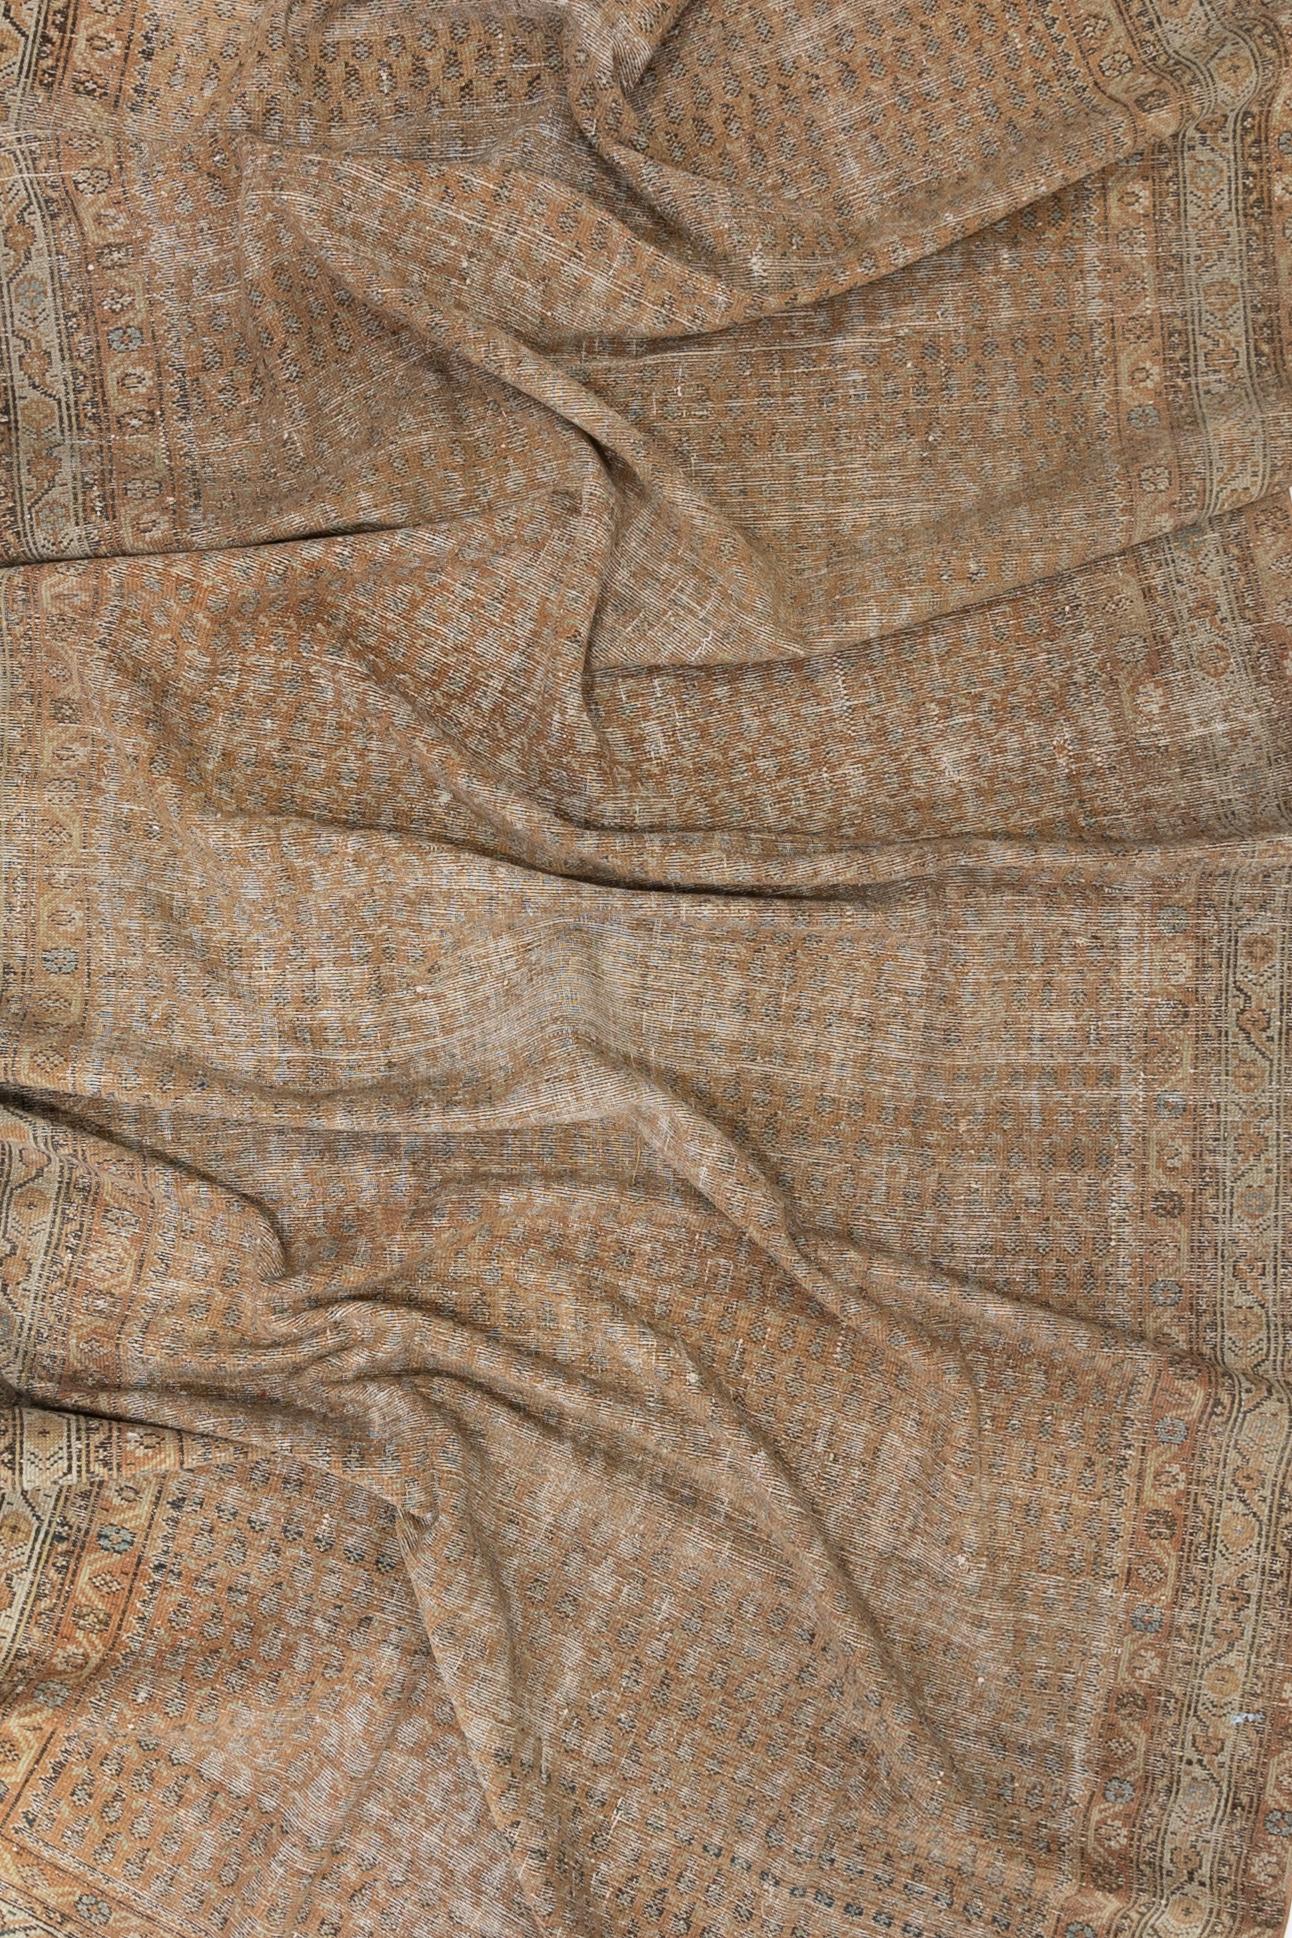 Age: Circa 1930

Colors: terra-cotta, olive, brown

Pile: low

Wear Notes: 3-4

Material: Wool on Cotton. 

Beautiful warm toned Malayer with an all over boteh pattern and just the right amount of wear. Safe for high traffic. 

Vintage